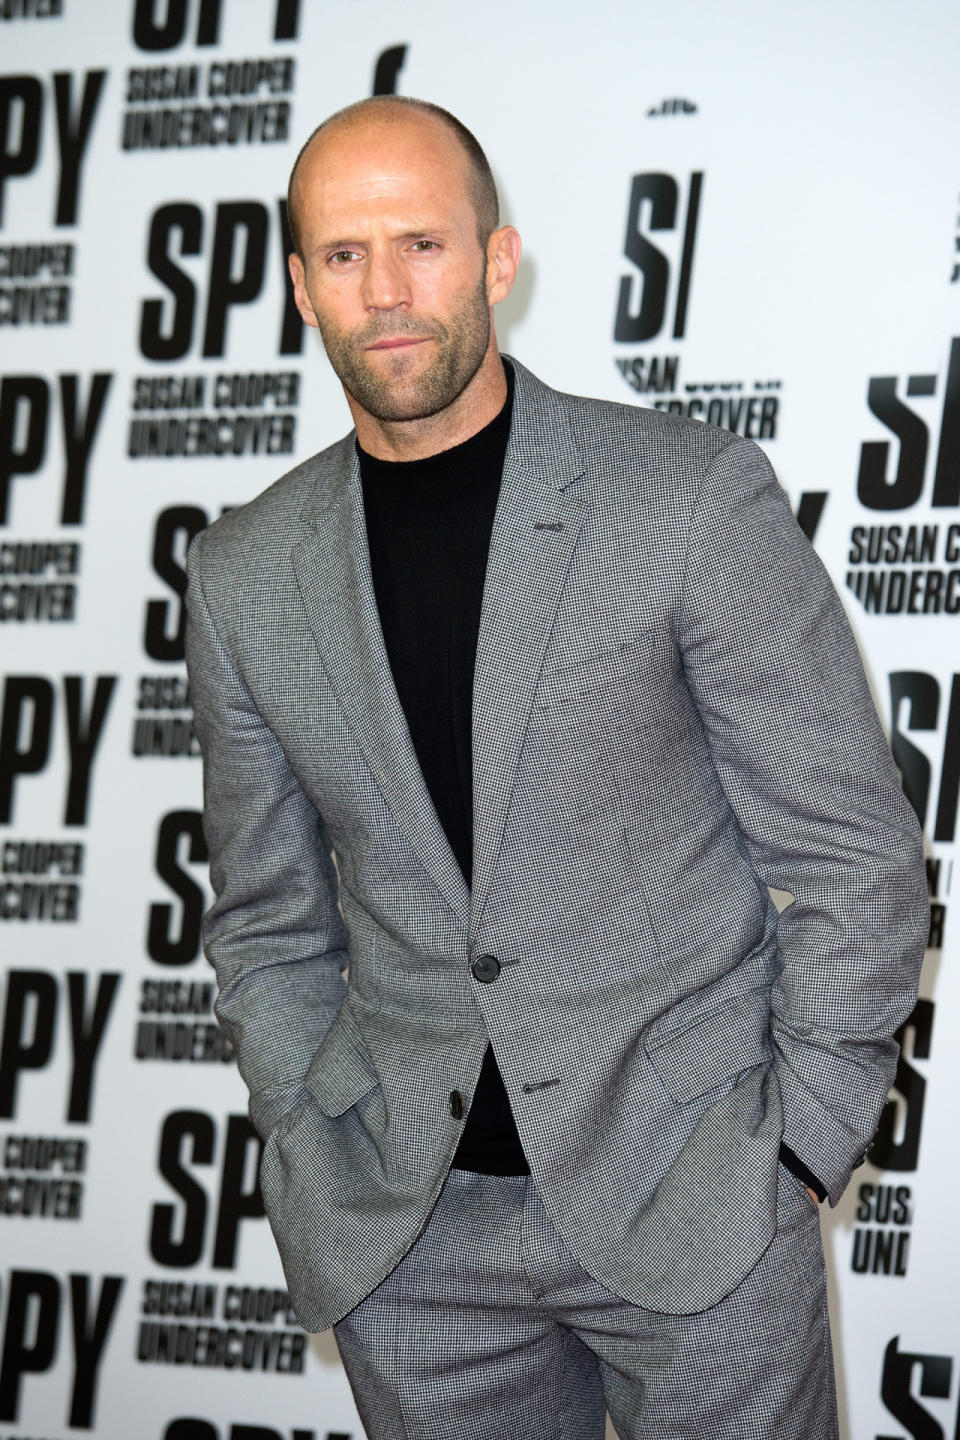 Jason Statham loves a gray suit so much he wore one thrice. He mixed up his uniform with a black T-shirt as opposed to a button-down underneath.